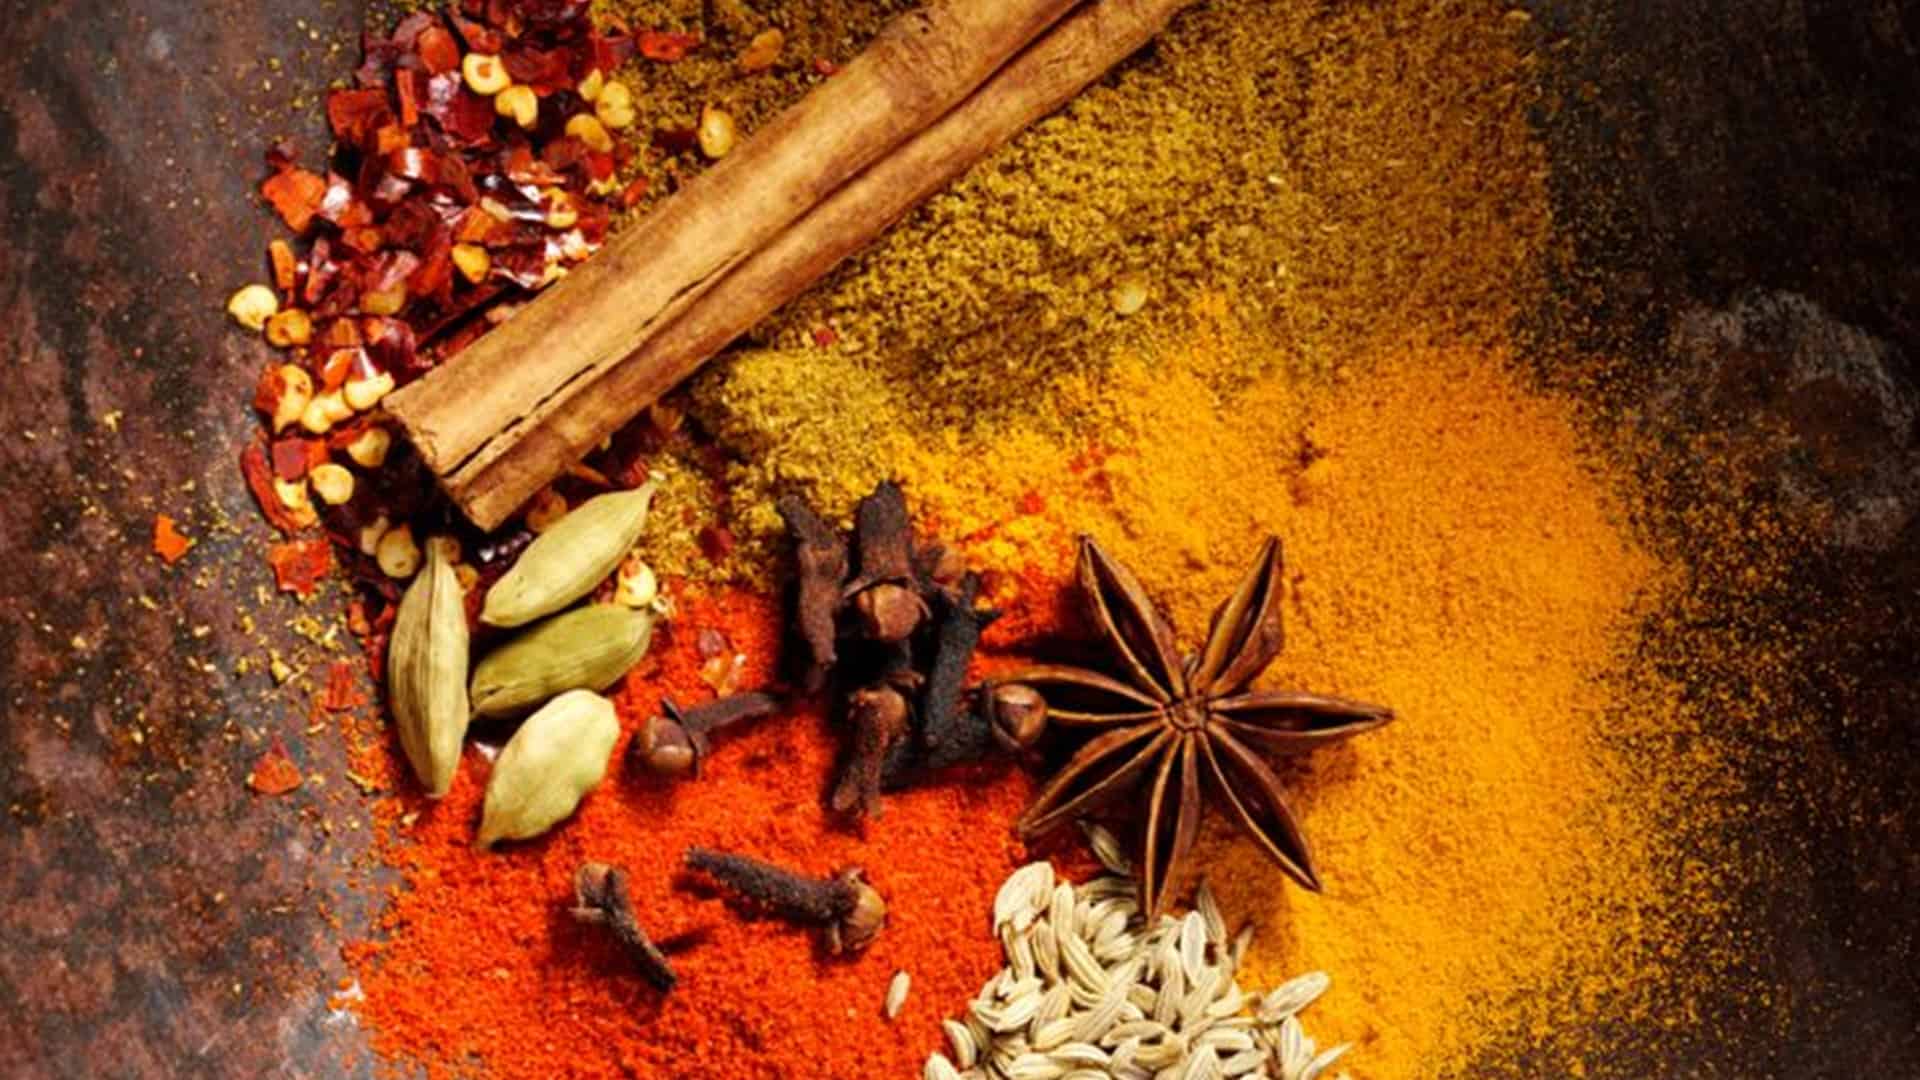 Spice Indian Spices Hd - 1920x1080 Wallpaper - teahub.io